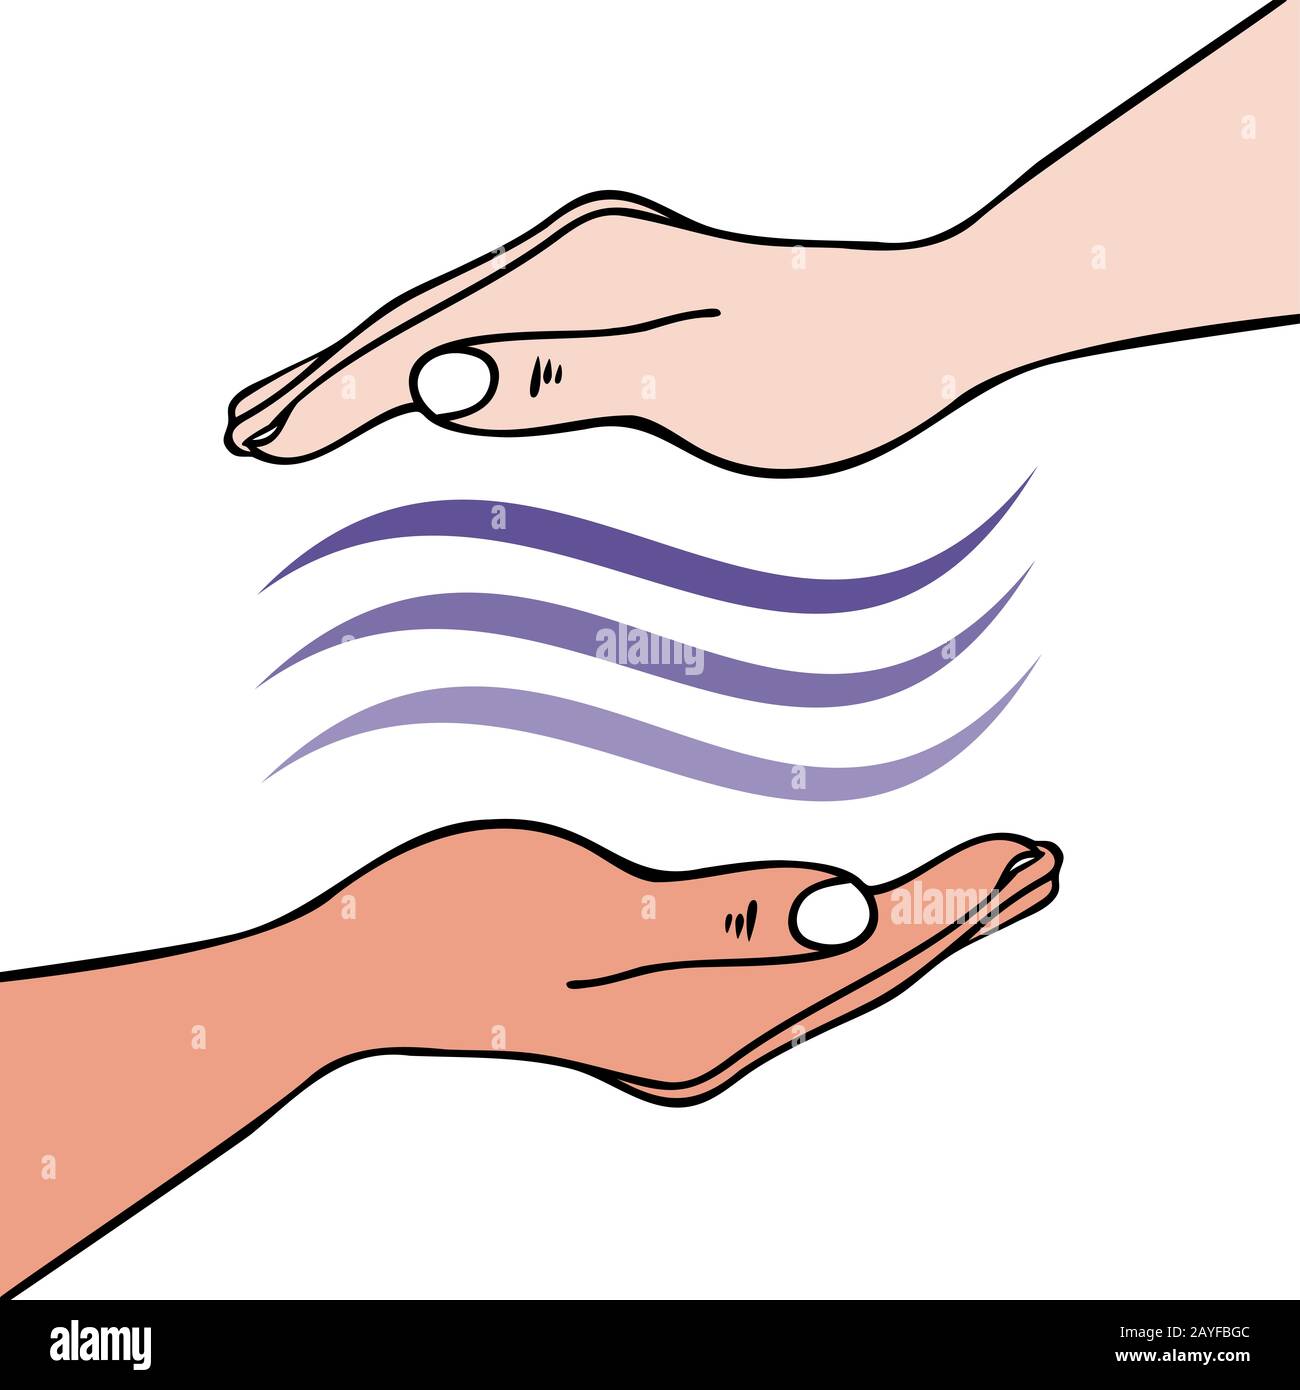 Hands-on healing showing hand sending univeral energy waves for emotional or physical healing - for Reiki, Alternative medicine Stock Photo